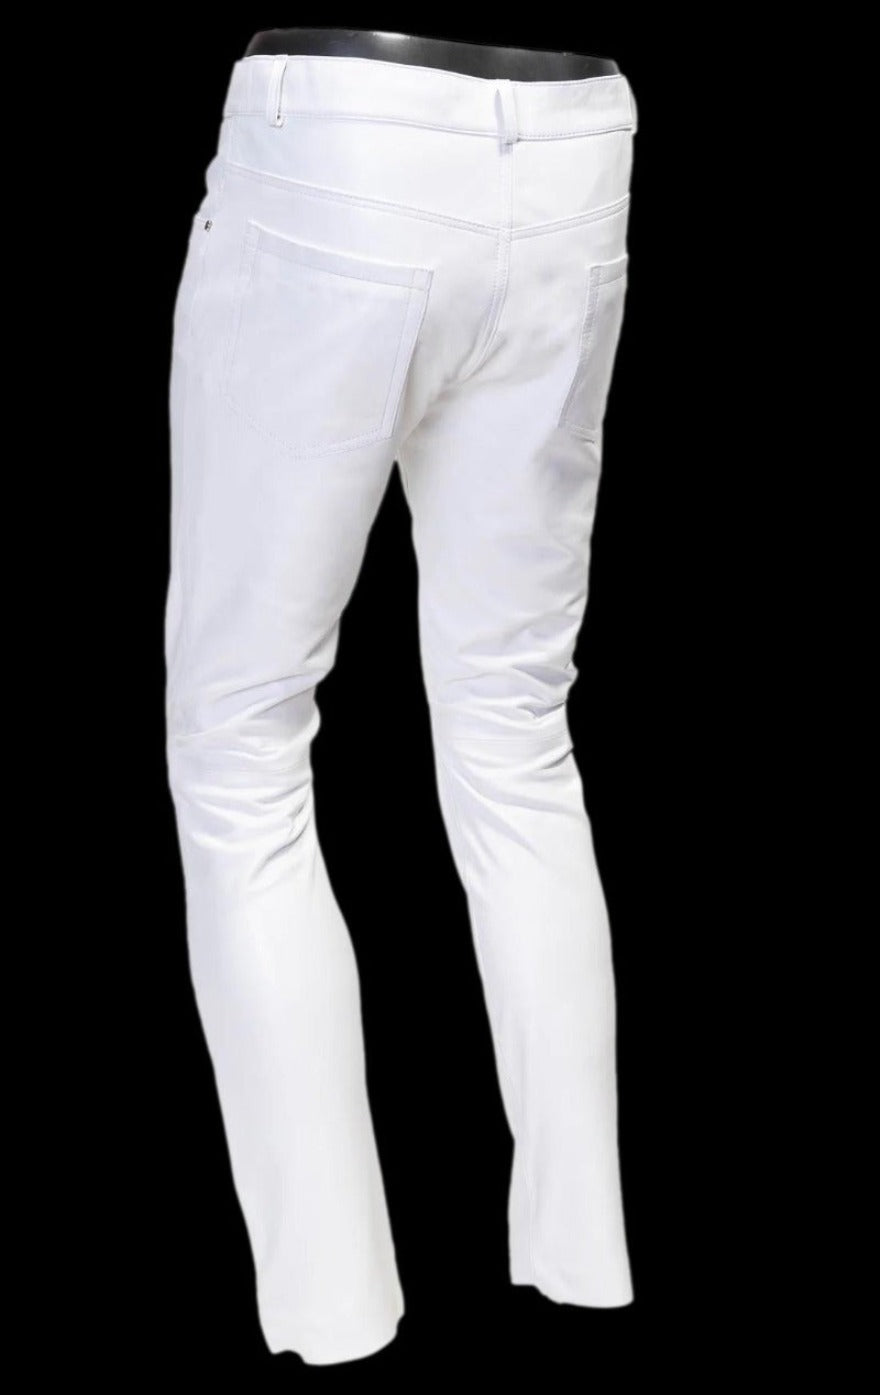 Picture of our Mens White Leather Jeans, back view.